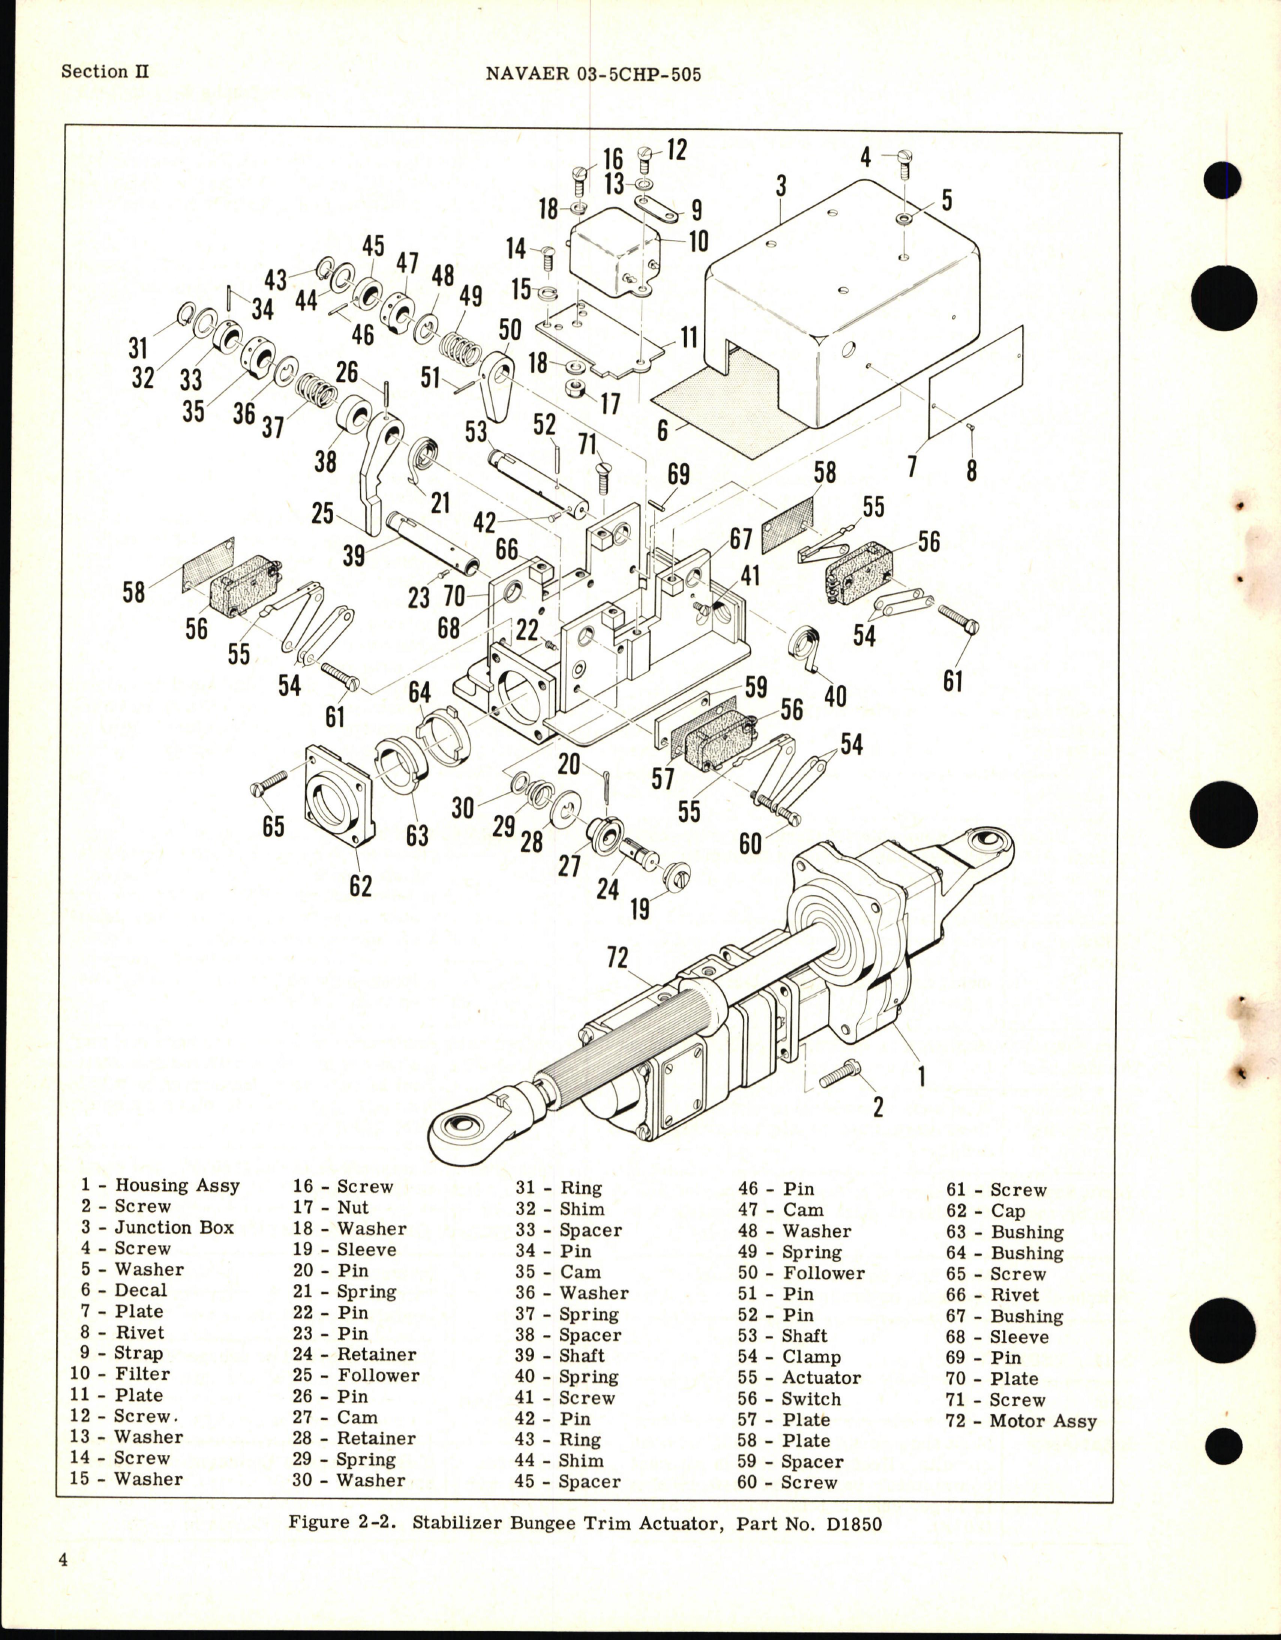 Sample page 6 from AirCorps Library document: Overhaul Instructions for Stabilizer Bungee Trim Actuator Part D1850 and D1850-1